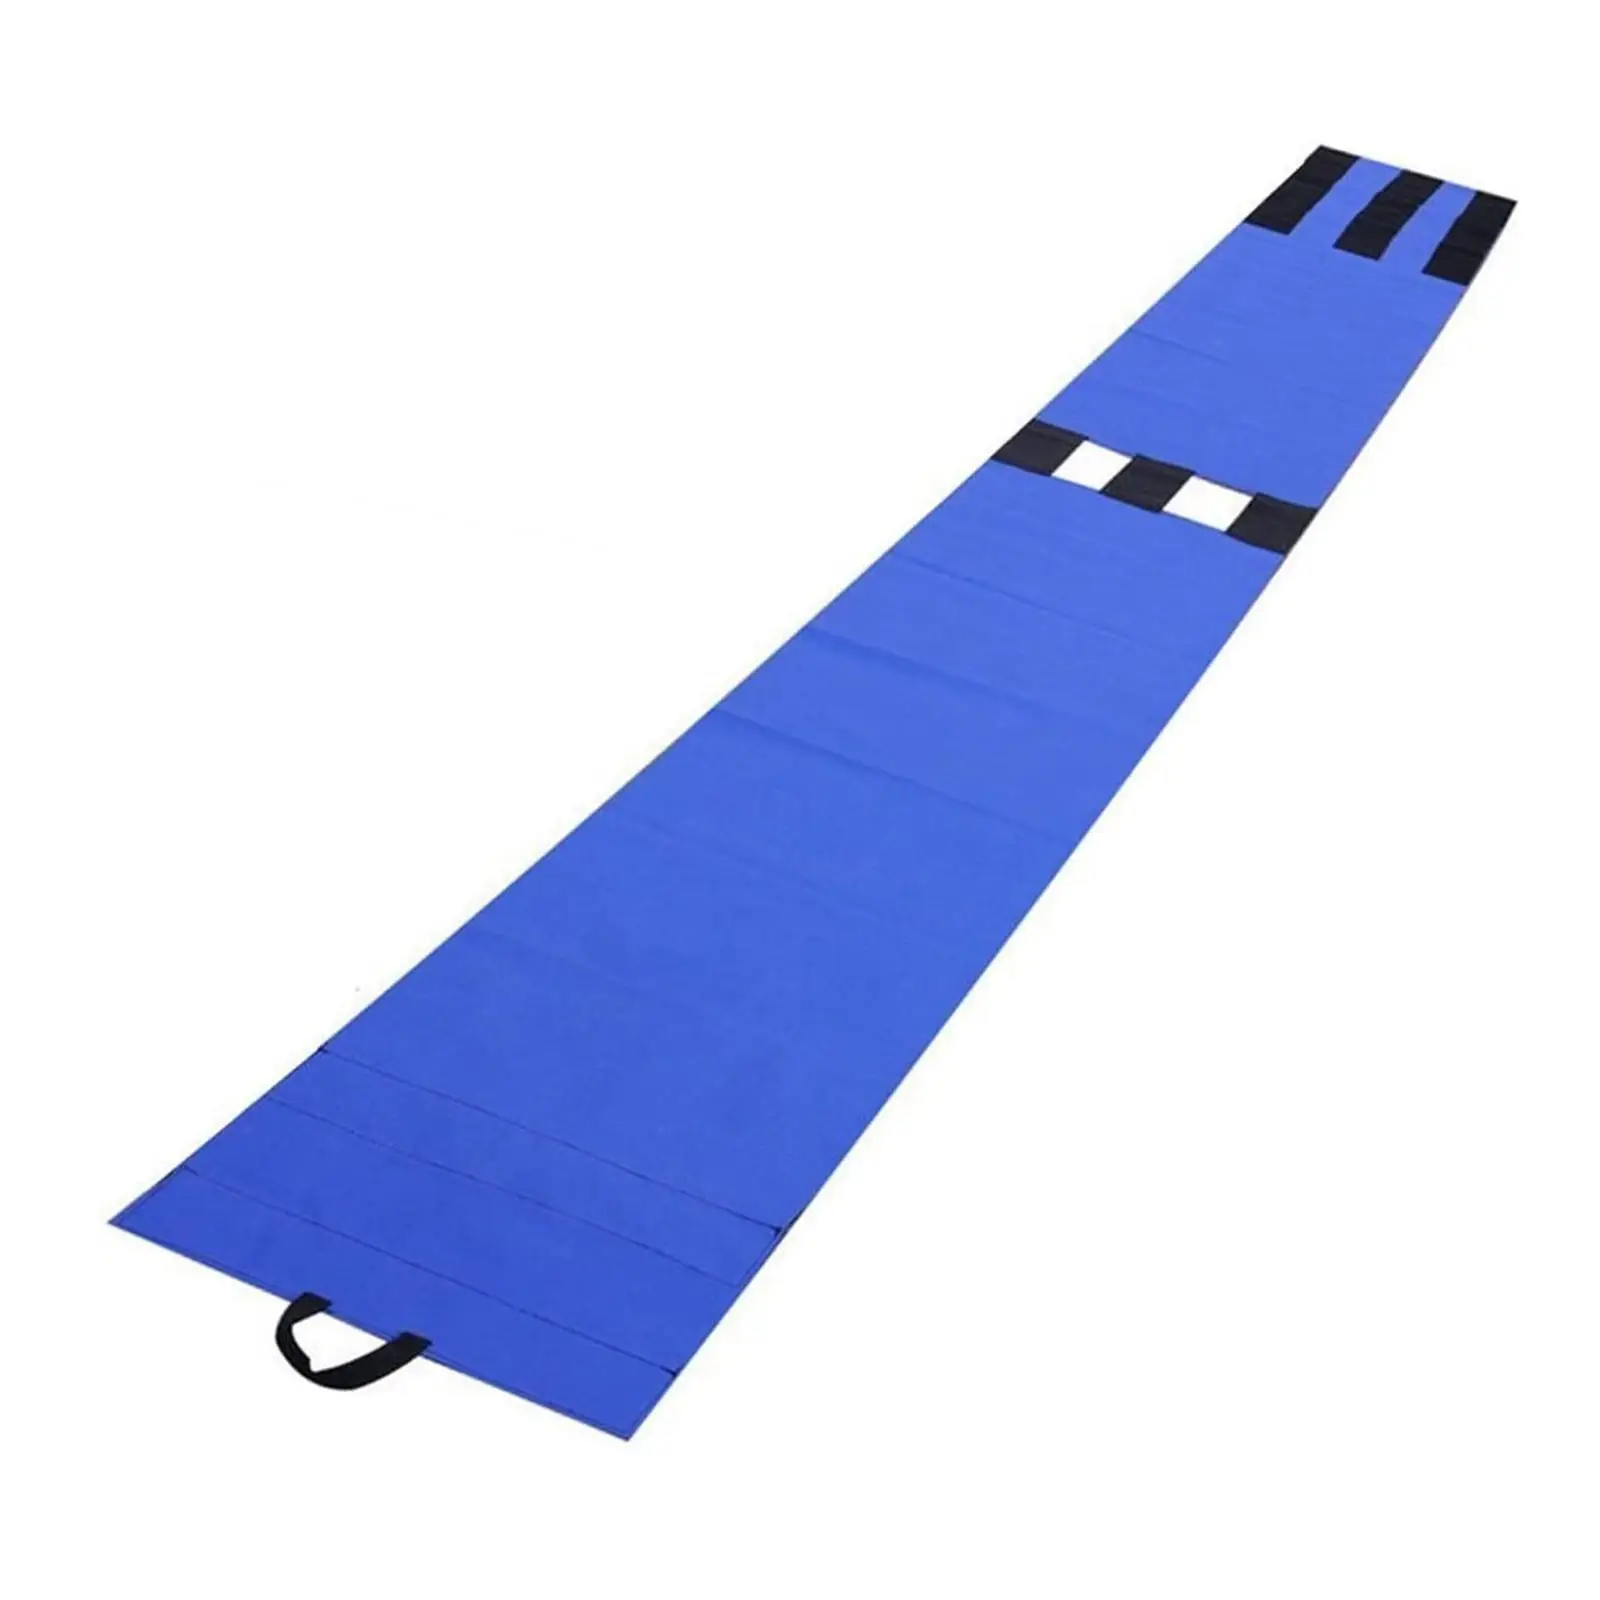 Binding Belt Durable Convenient Easy to Use Reusable for Logistics